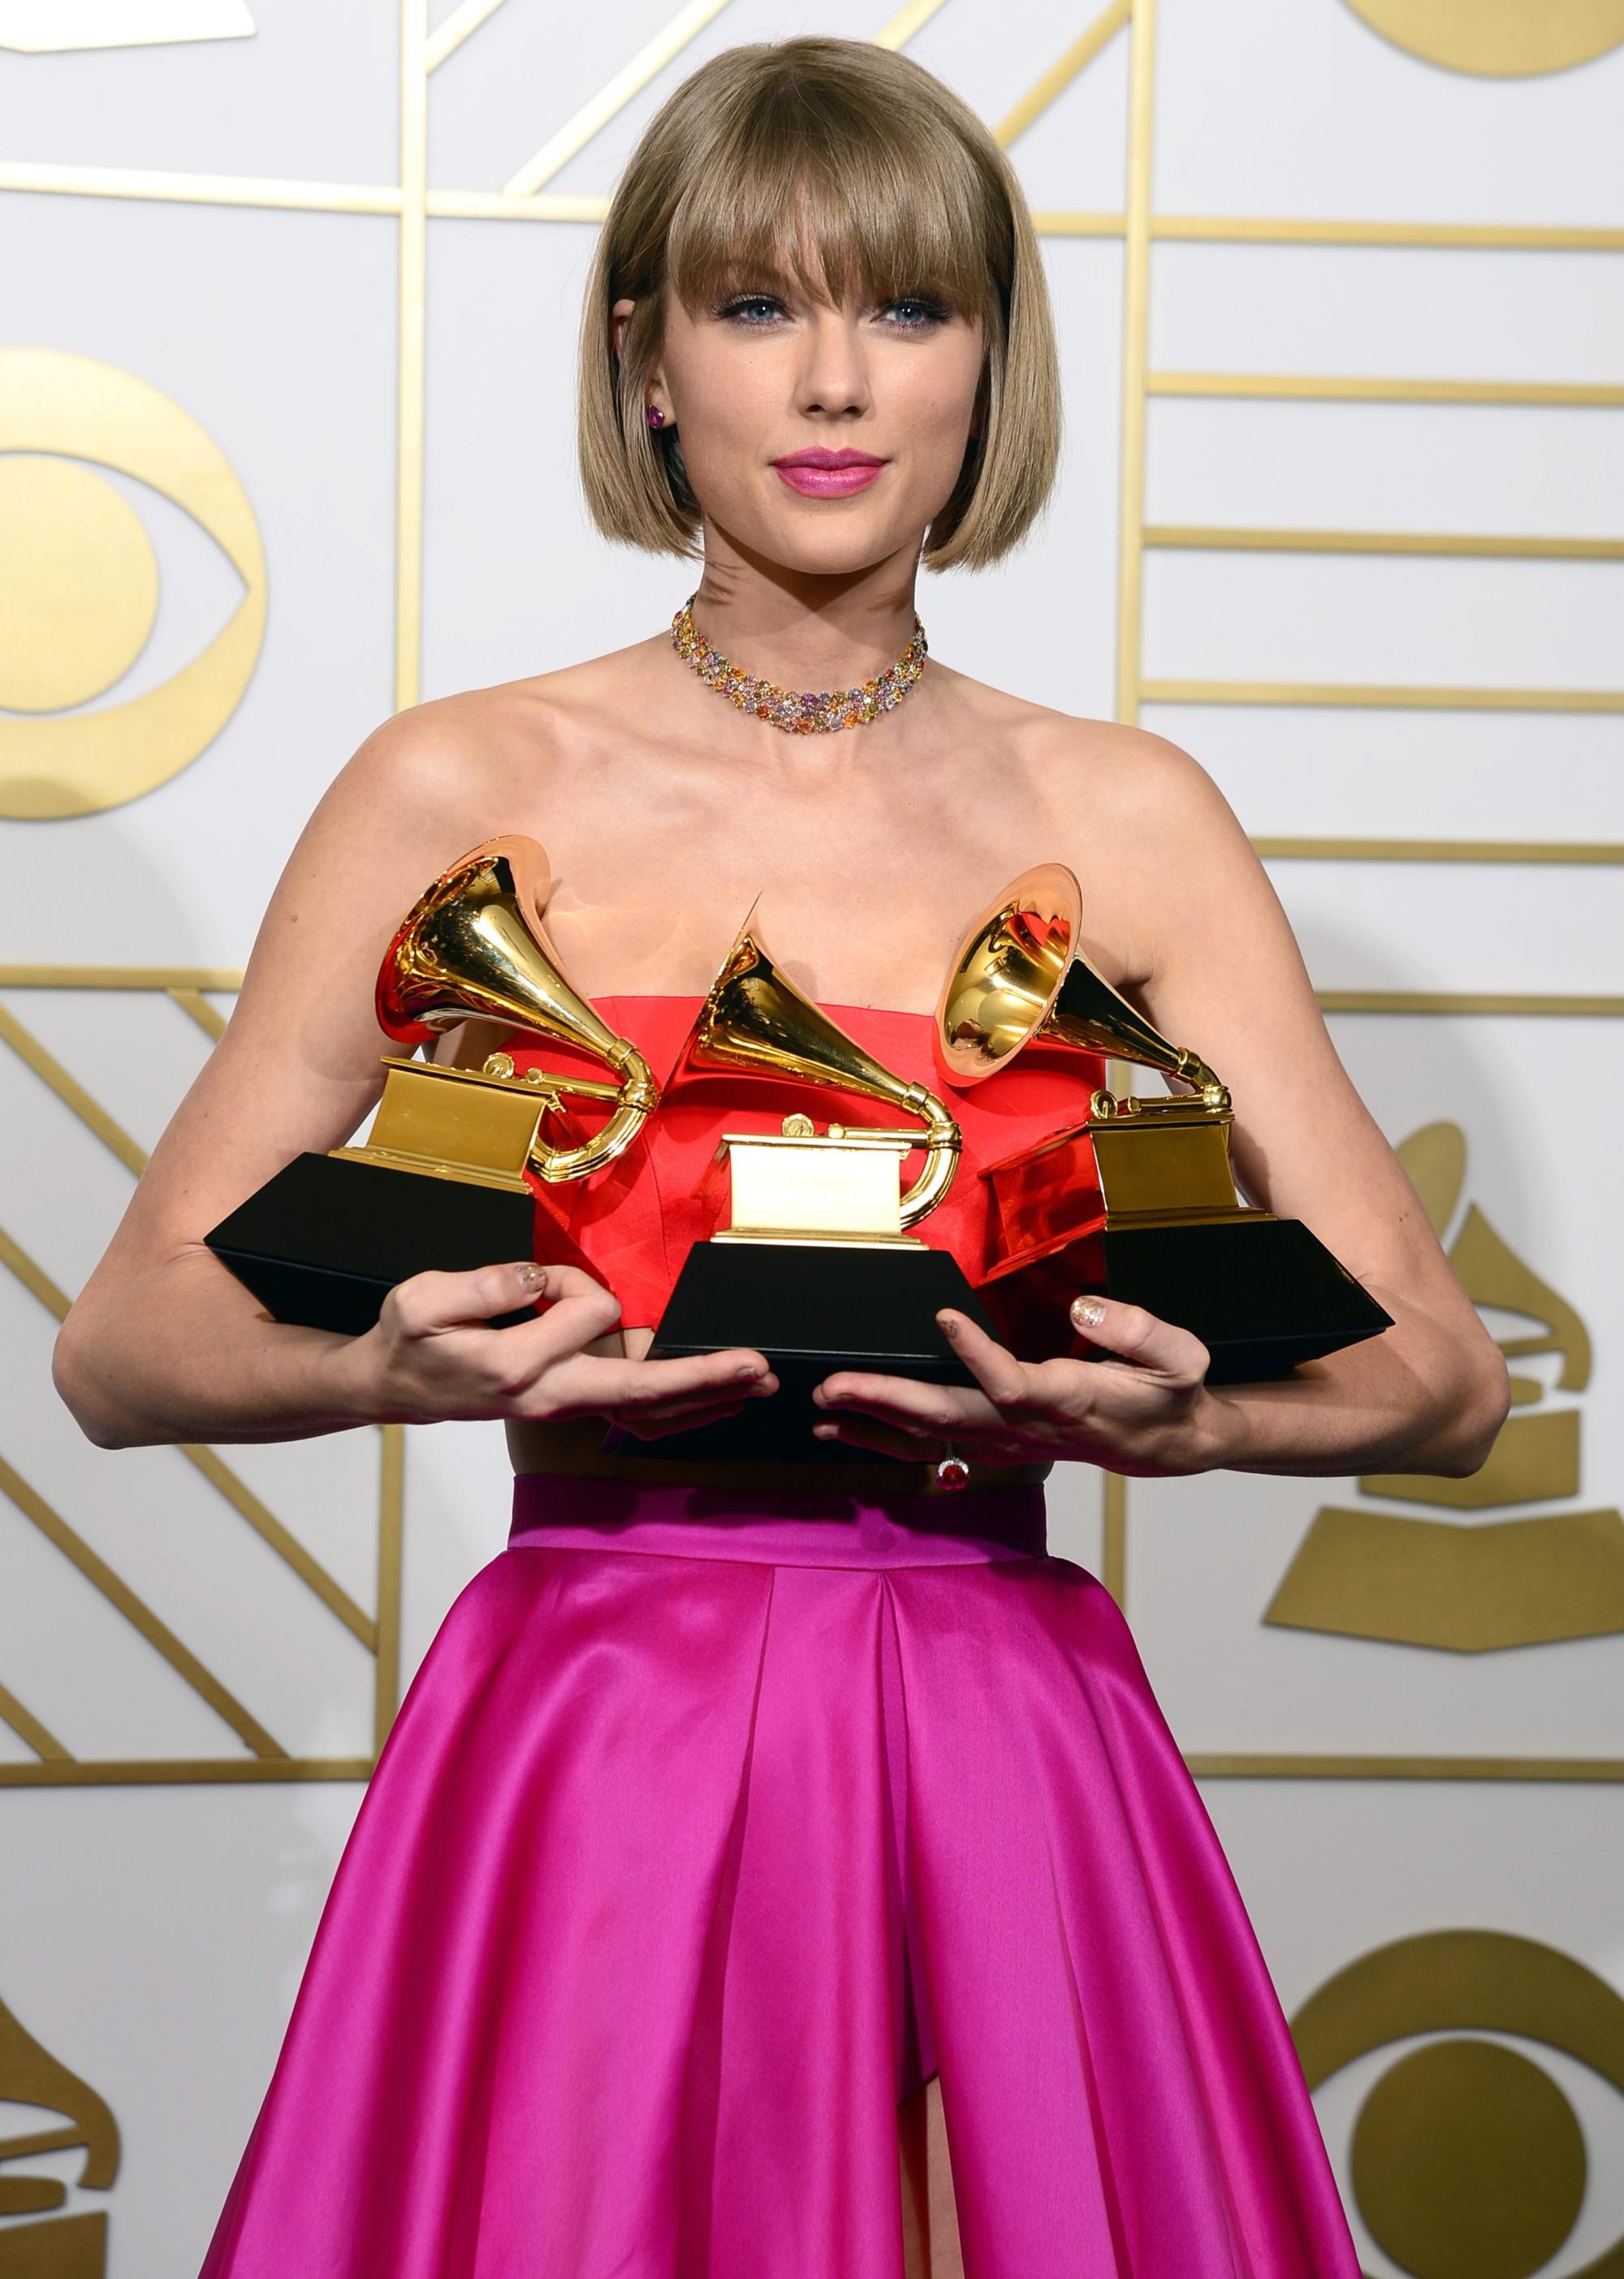 Taylor Swift holds up her awards for best music video, best pop vocal album and album of the year at the Grammy Awards in 2016. Photo: EPA